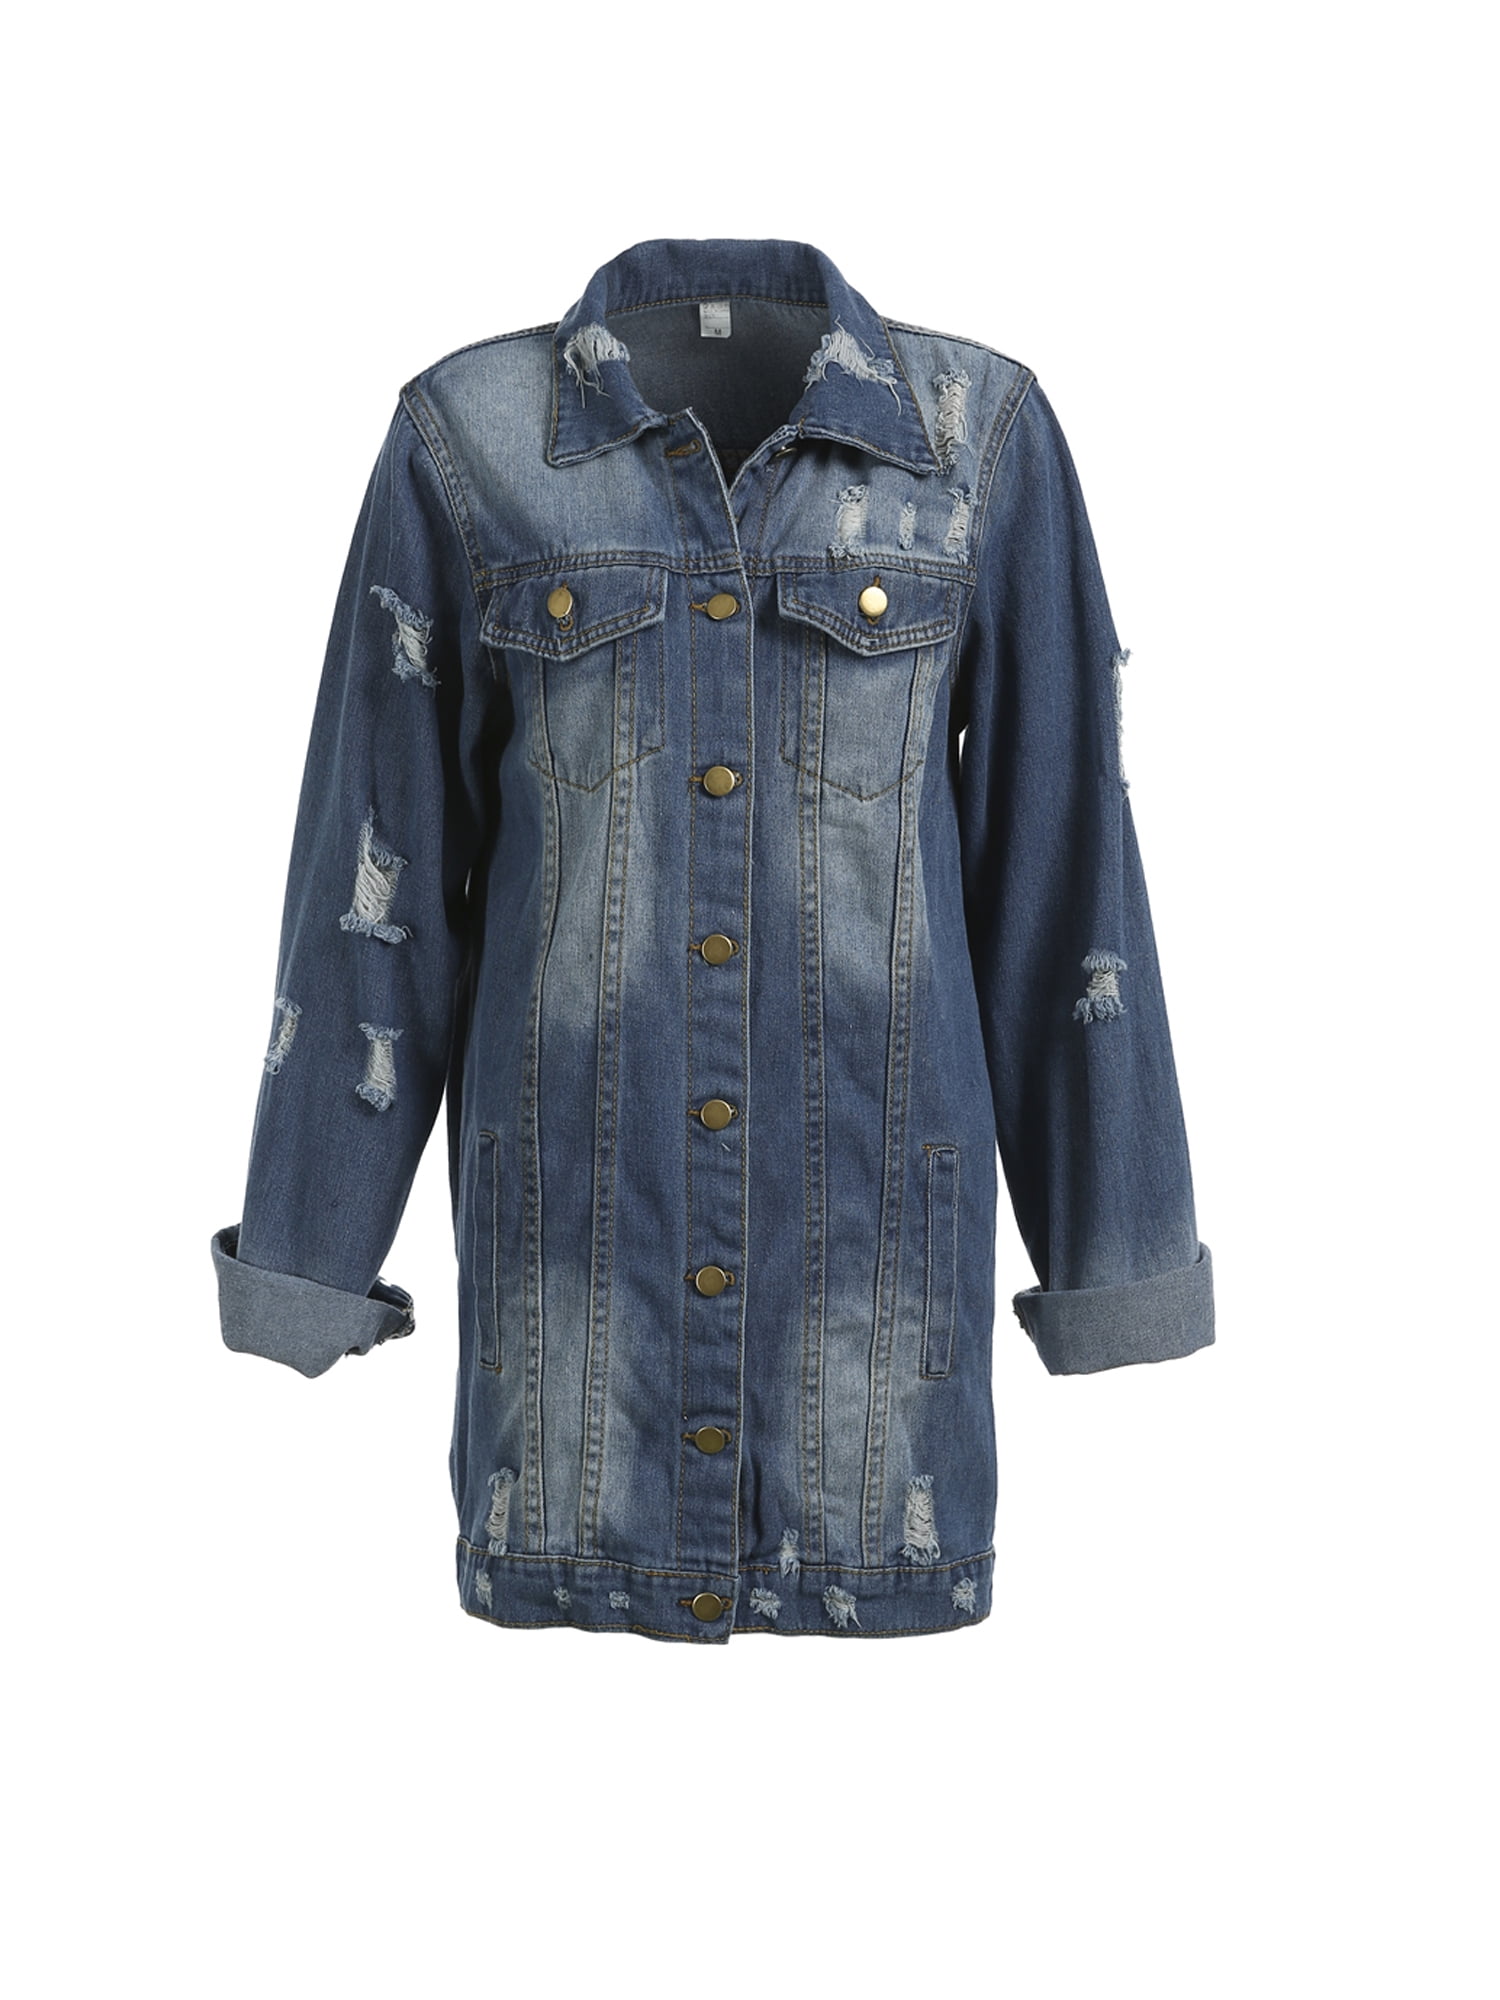 7 For All Mankind girls Over-sized Denim Jacket 